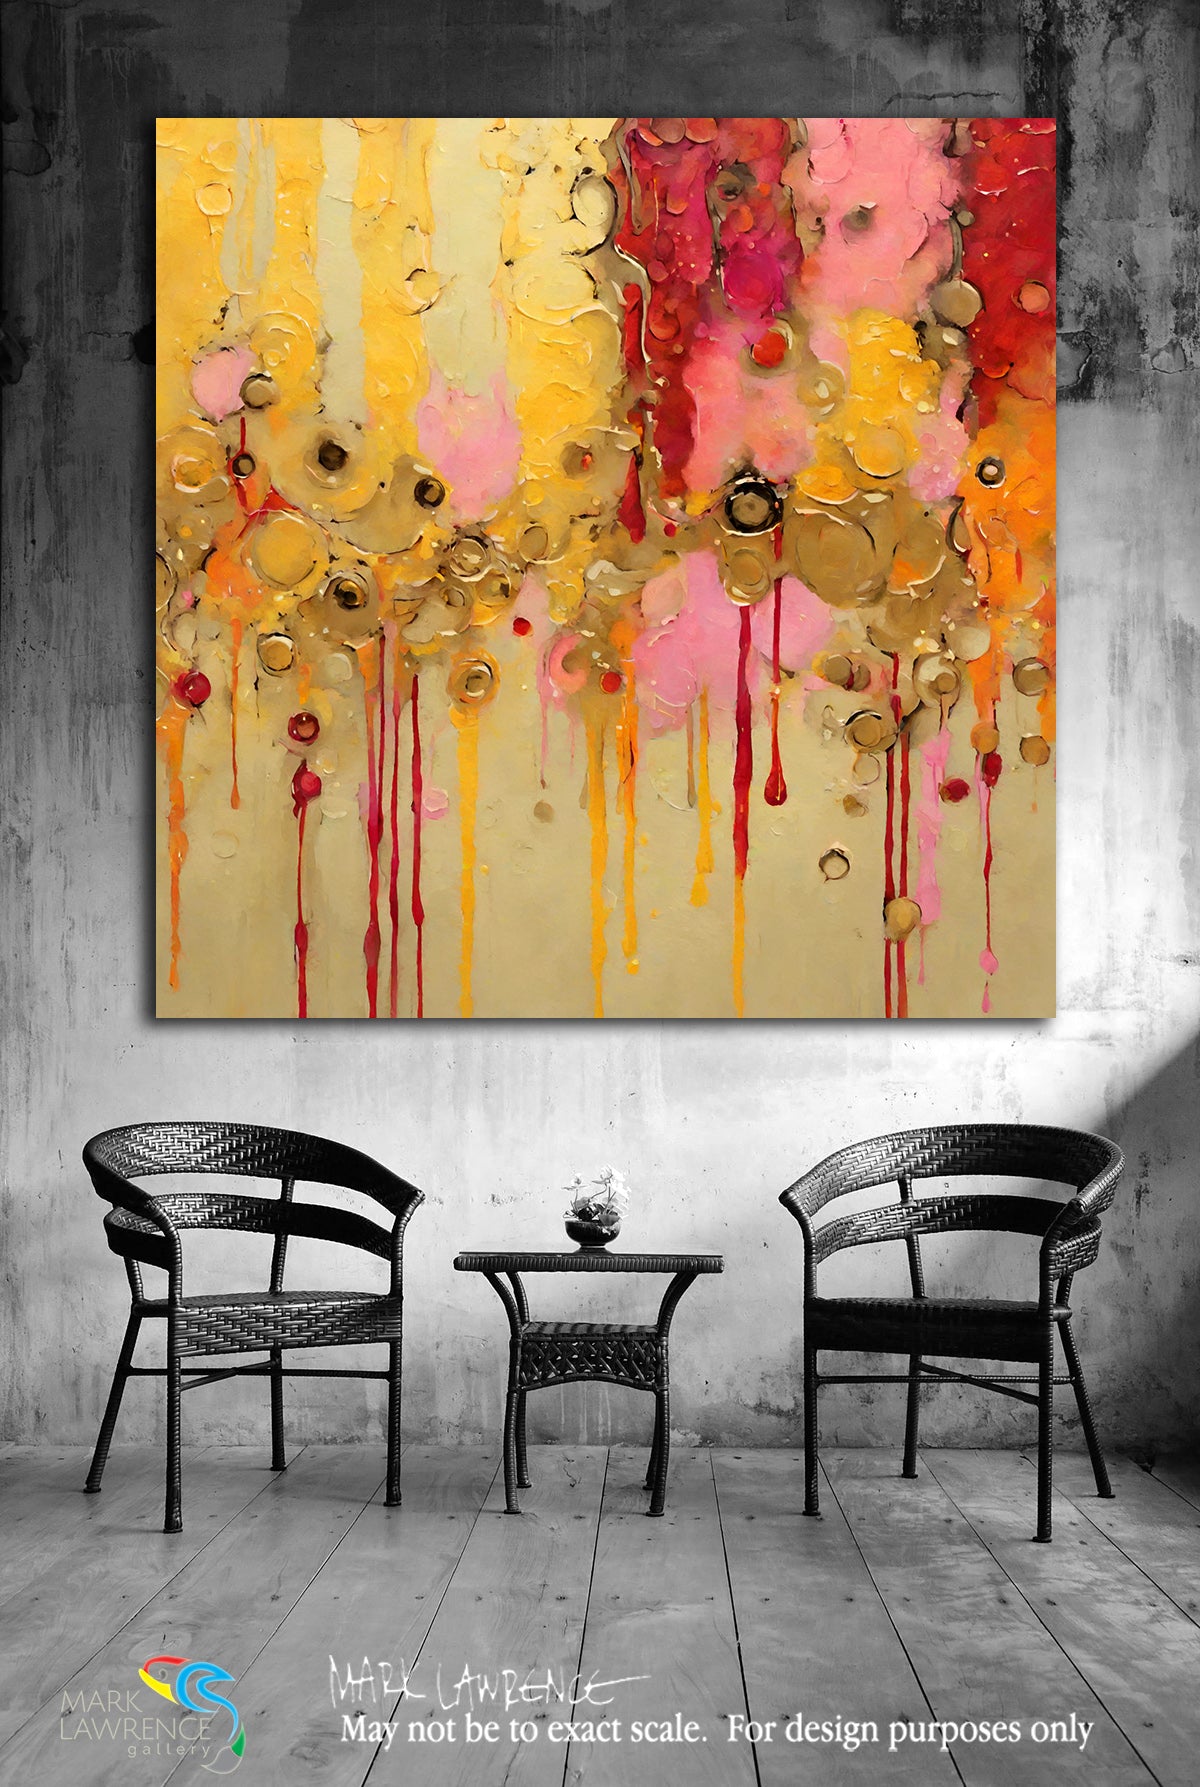 Interior Design Inspiration- Isaiah 45:8. Divine Rainfall. Limited Edition Christian Modern Art. Hand embellished & textured giclee paintings with bold brush strokes by the artist. Signed & numbered. Museum quality on canvas wall art prints. “Rain down, you heavens, from above, And let the skies pour down righteousness; Let the earth open, let them bring forth salvation, And let righteousness spring up together. I, the Lord, have created it.